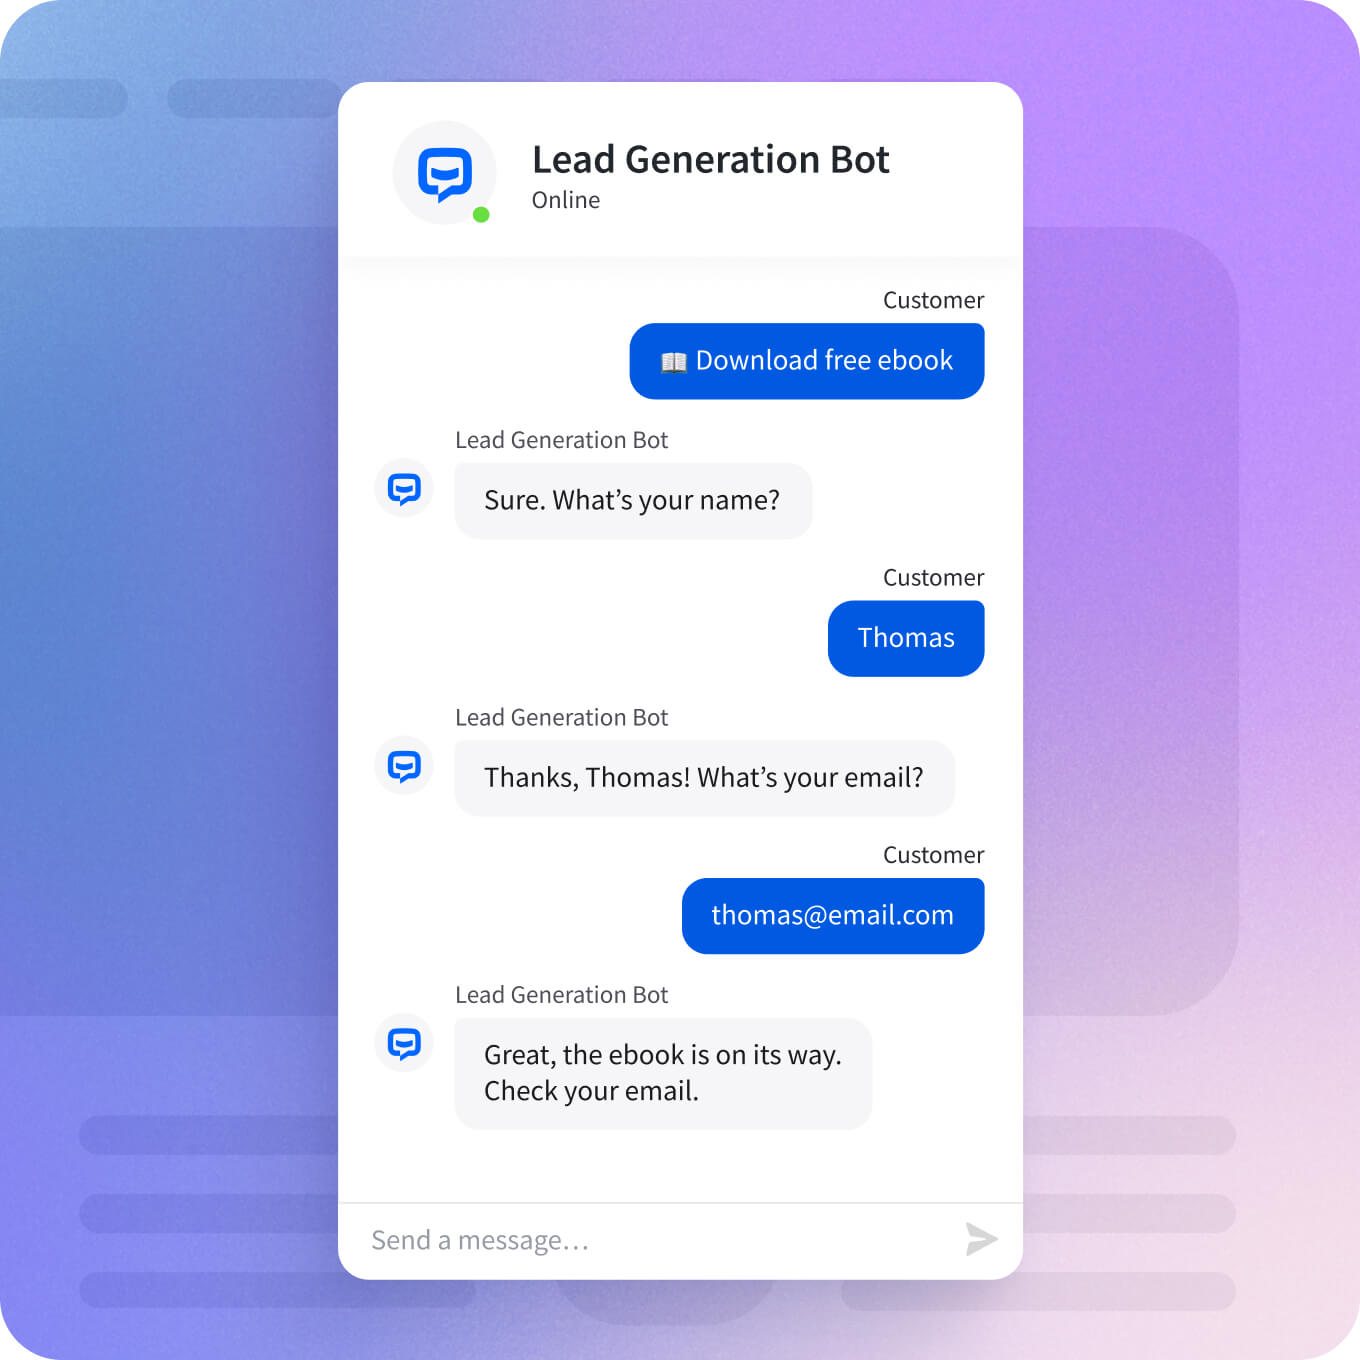 A chatbot window with an AI bot named 'Lead Generation Bot' guiding a customer through the process of downloading a free ebook by asking for their name and email address, then confirming the ebook has been sent.